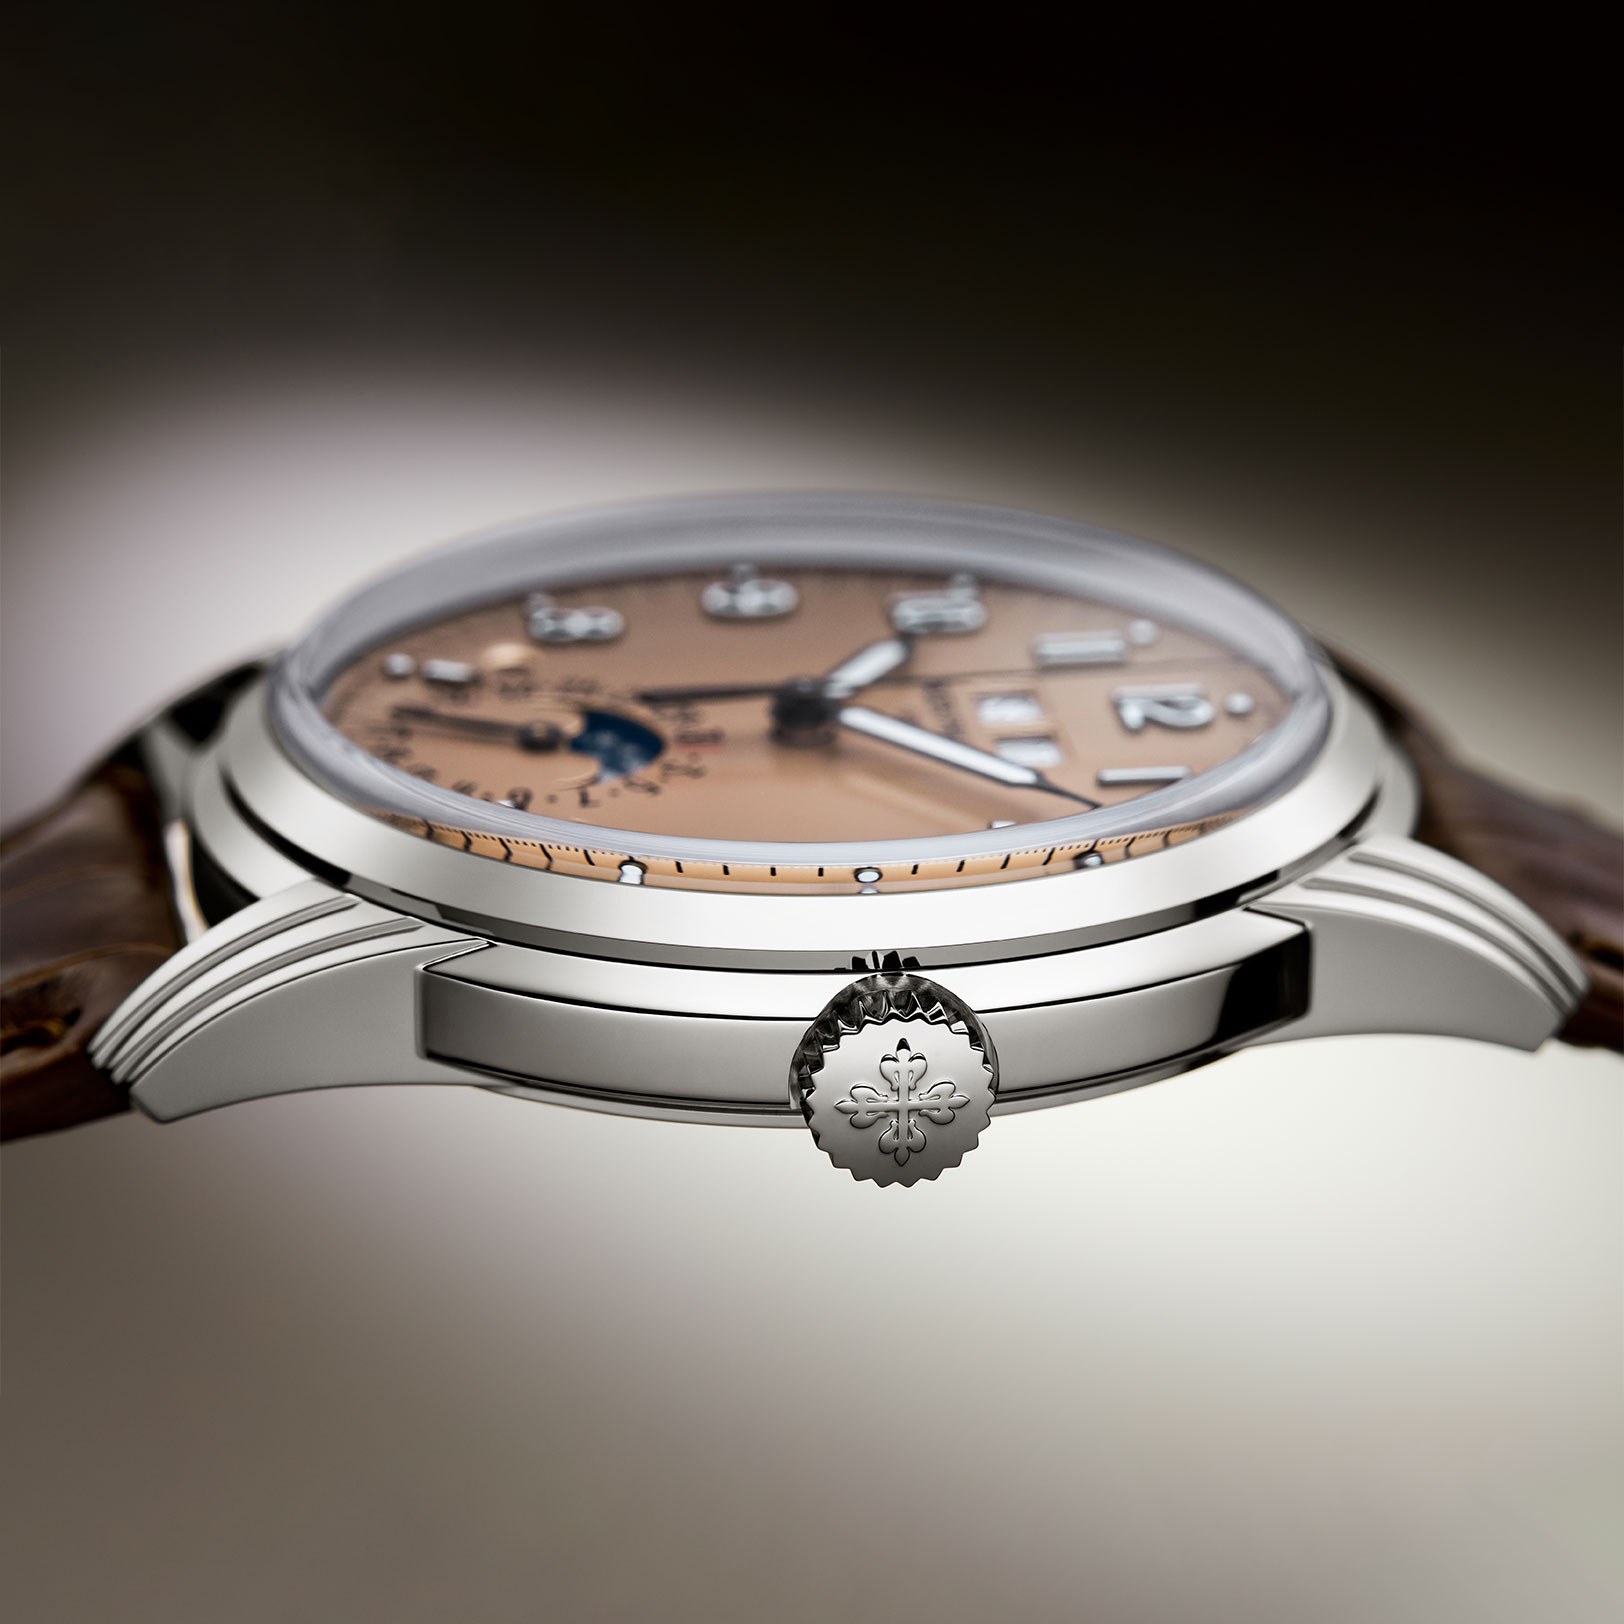 Grand Complications gallery 7